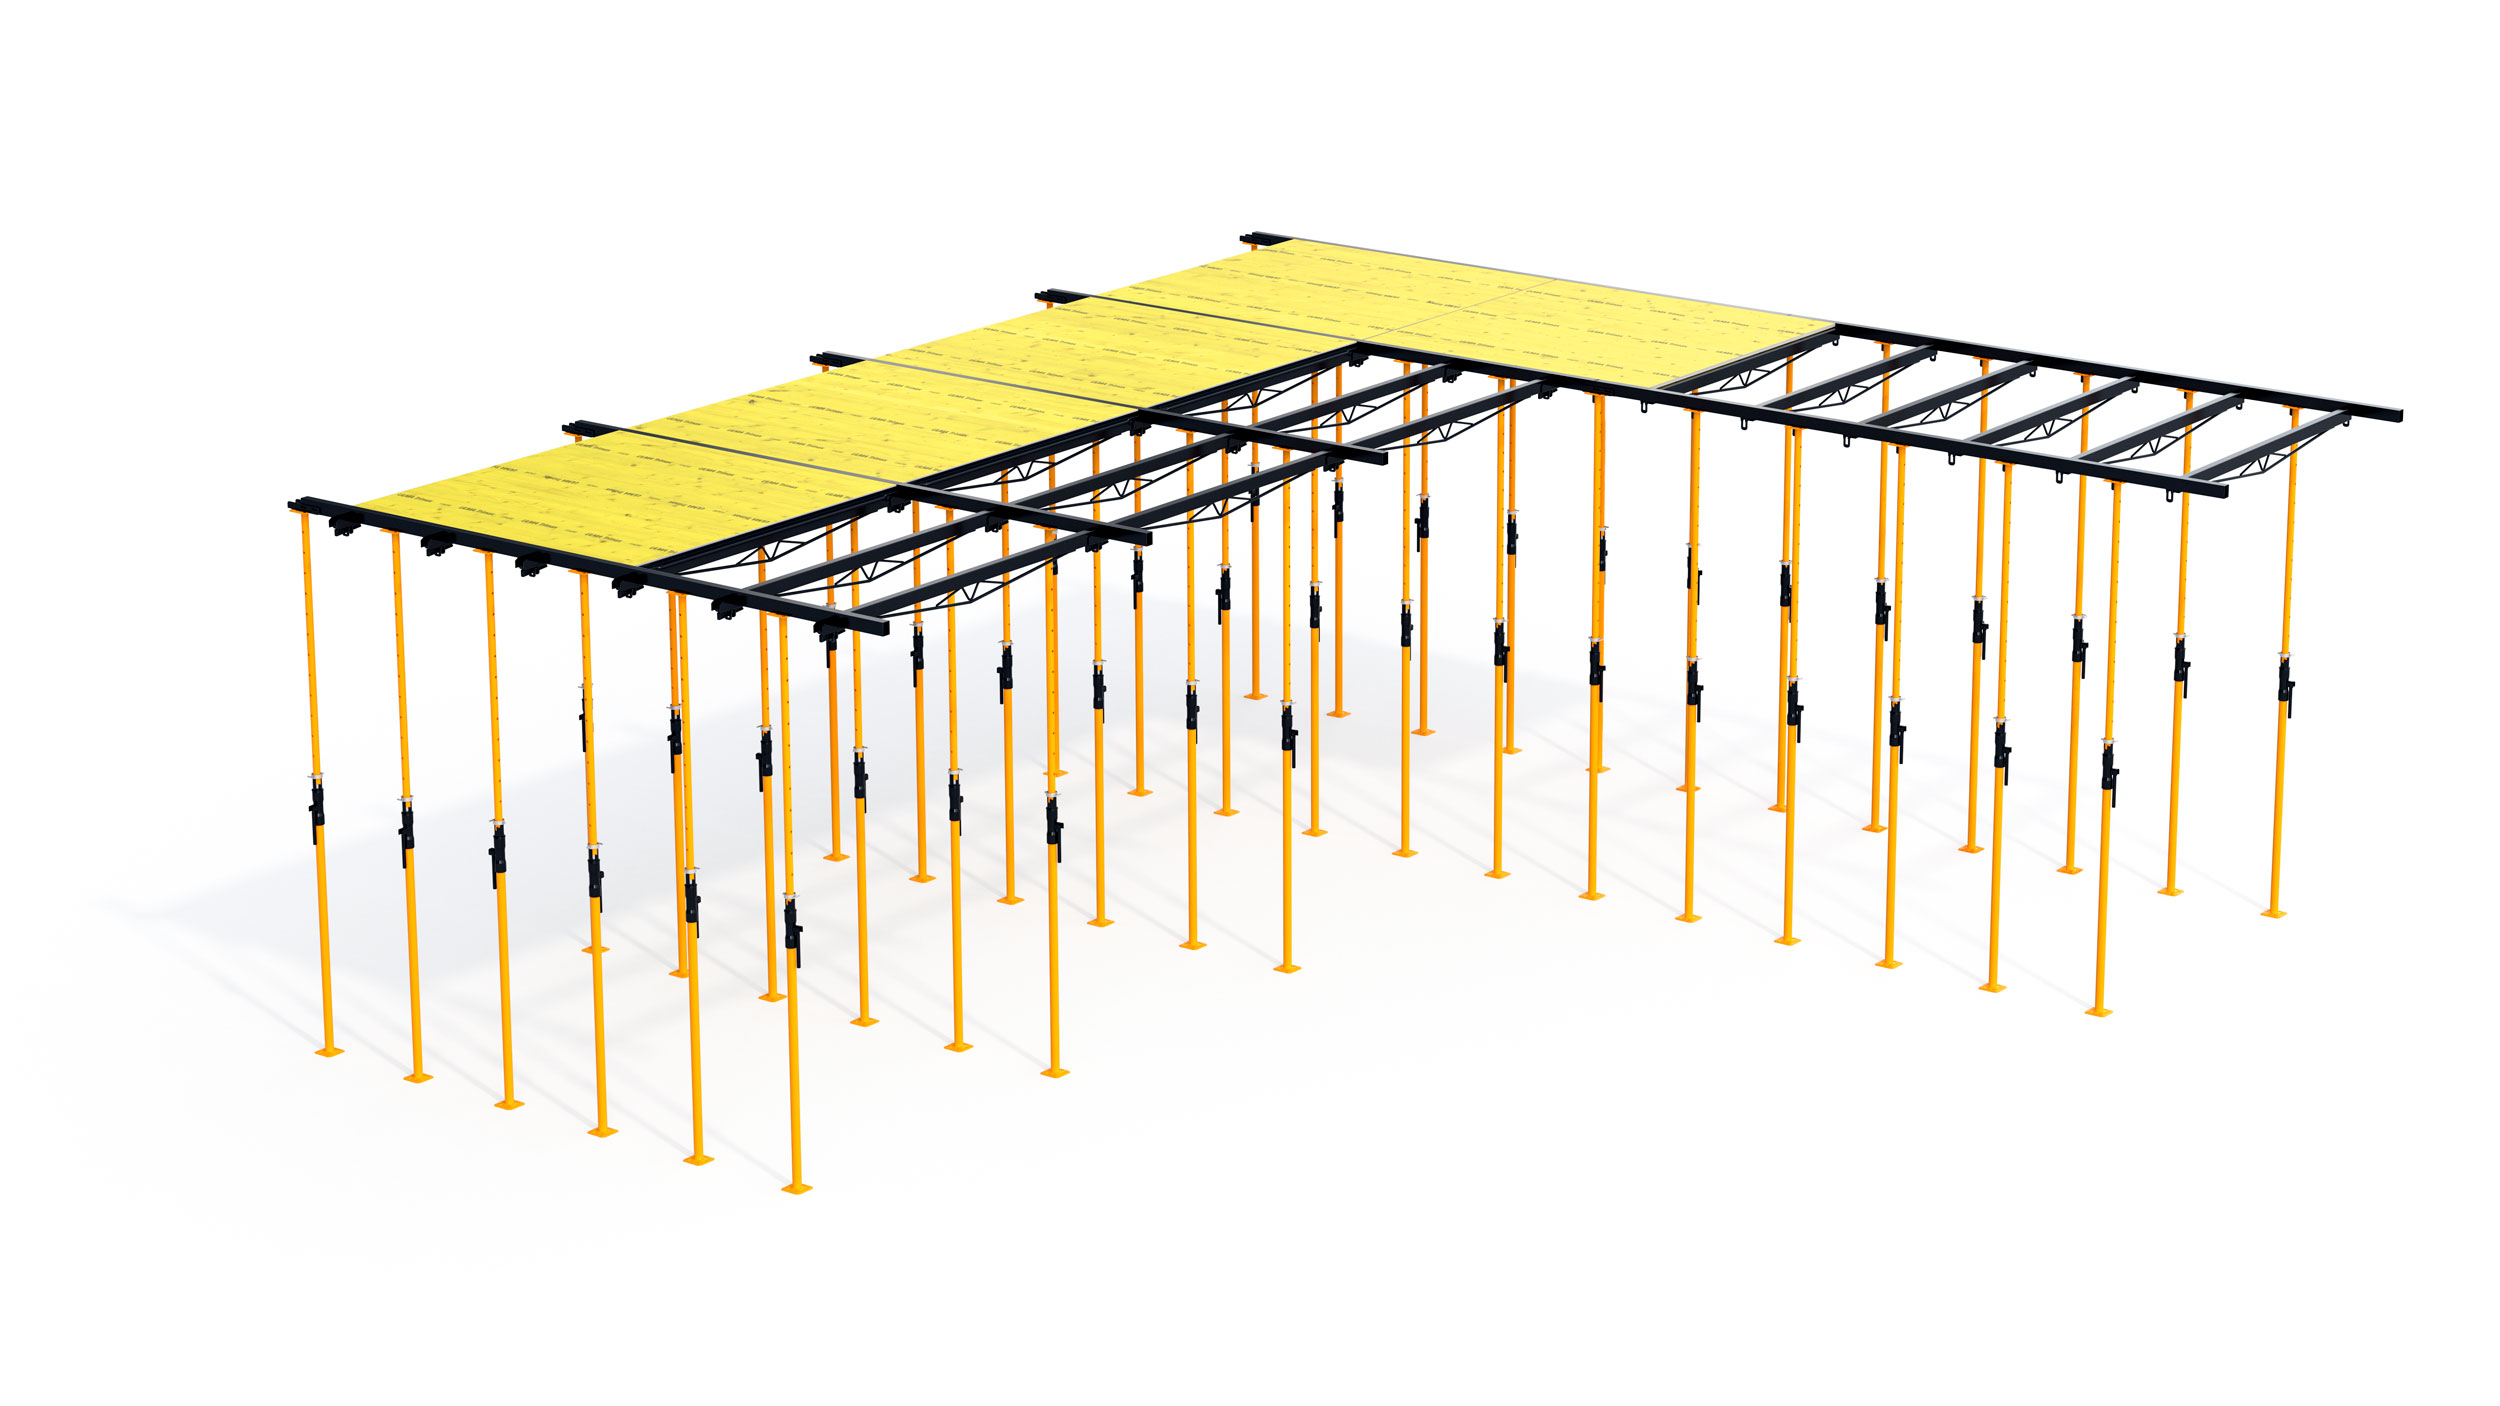 High performance recoverable slab formwork system for building construction. 
Highlights: light components, fast assembly and disassembly.